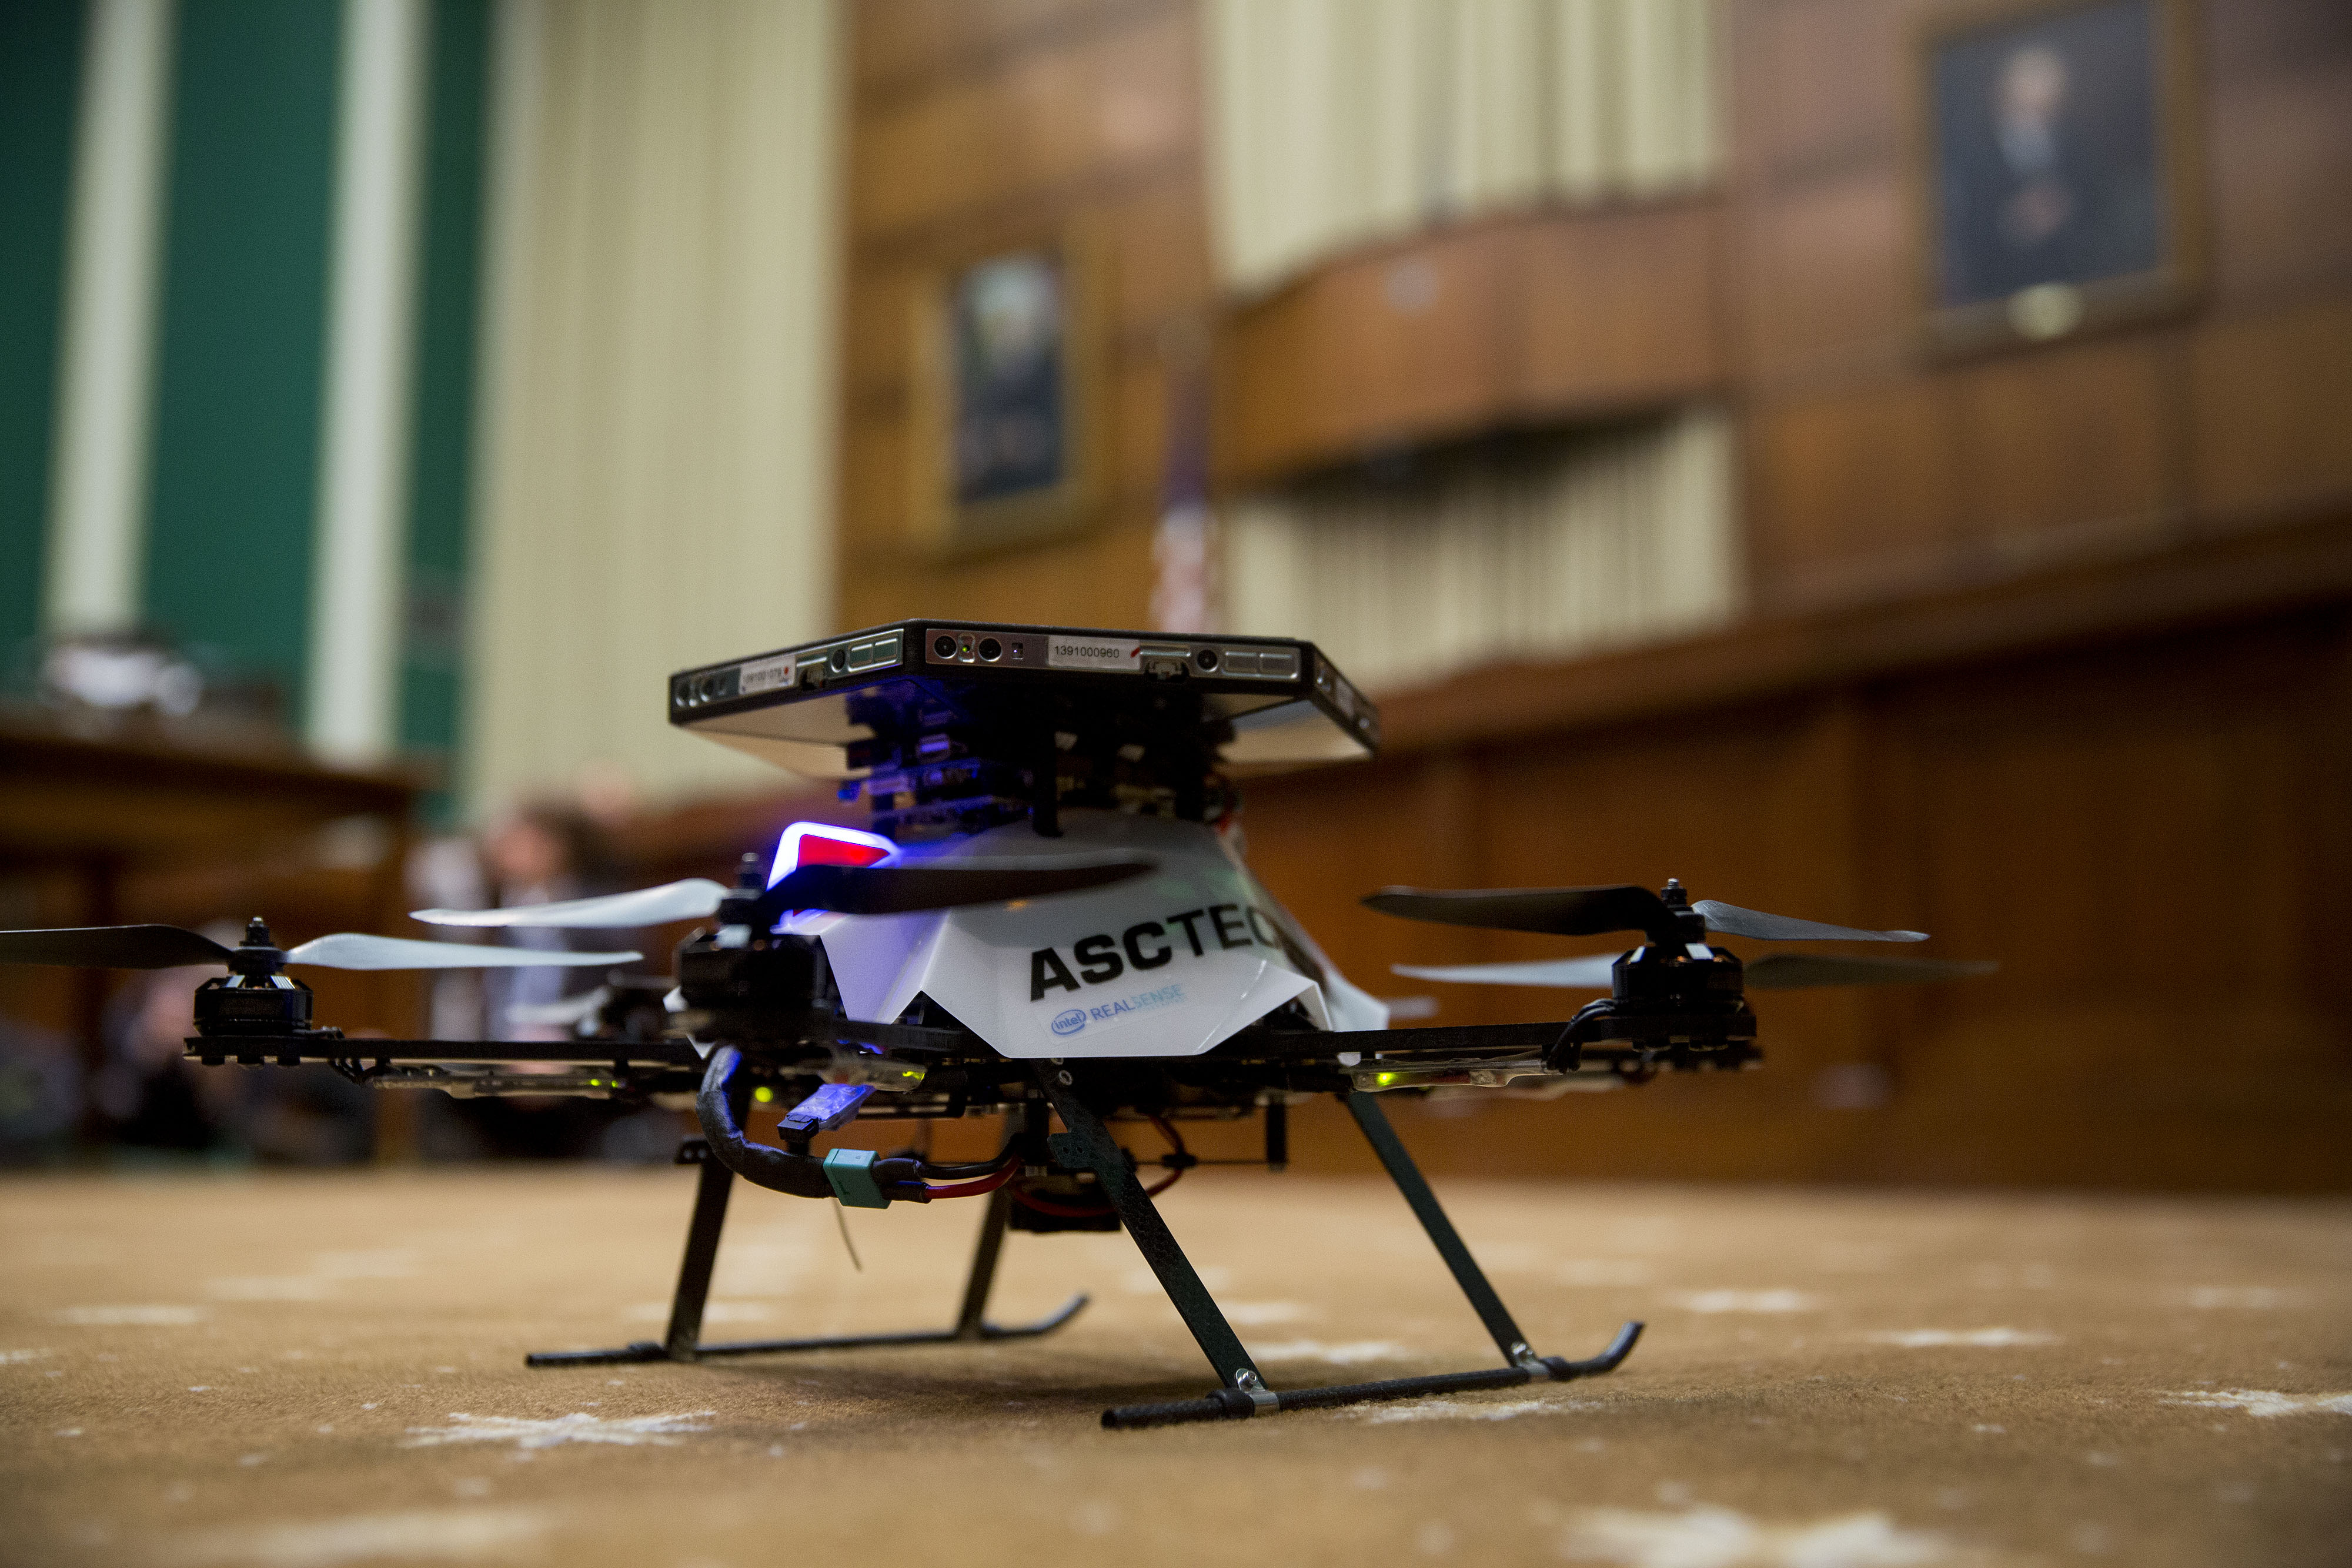 An AscTec Firefly drone sits on the floor during a House Energy and Commerce subcommittee hearing in Washington, D.C. on Nov. 19, 2015. (Andrew Harrer—Getty Images)